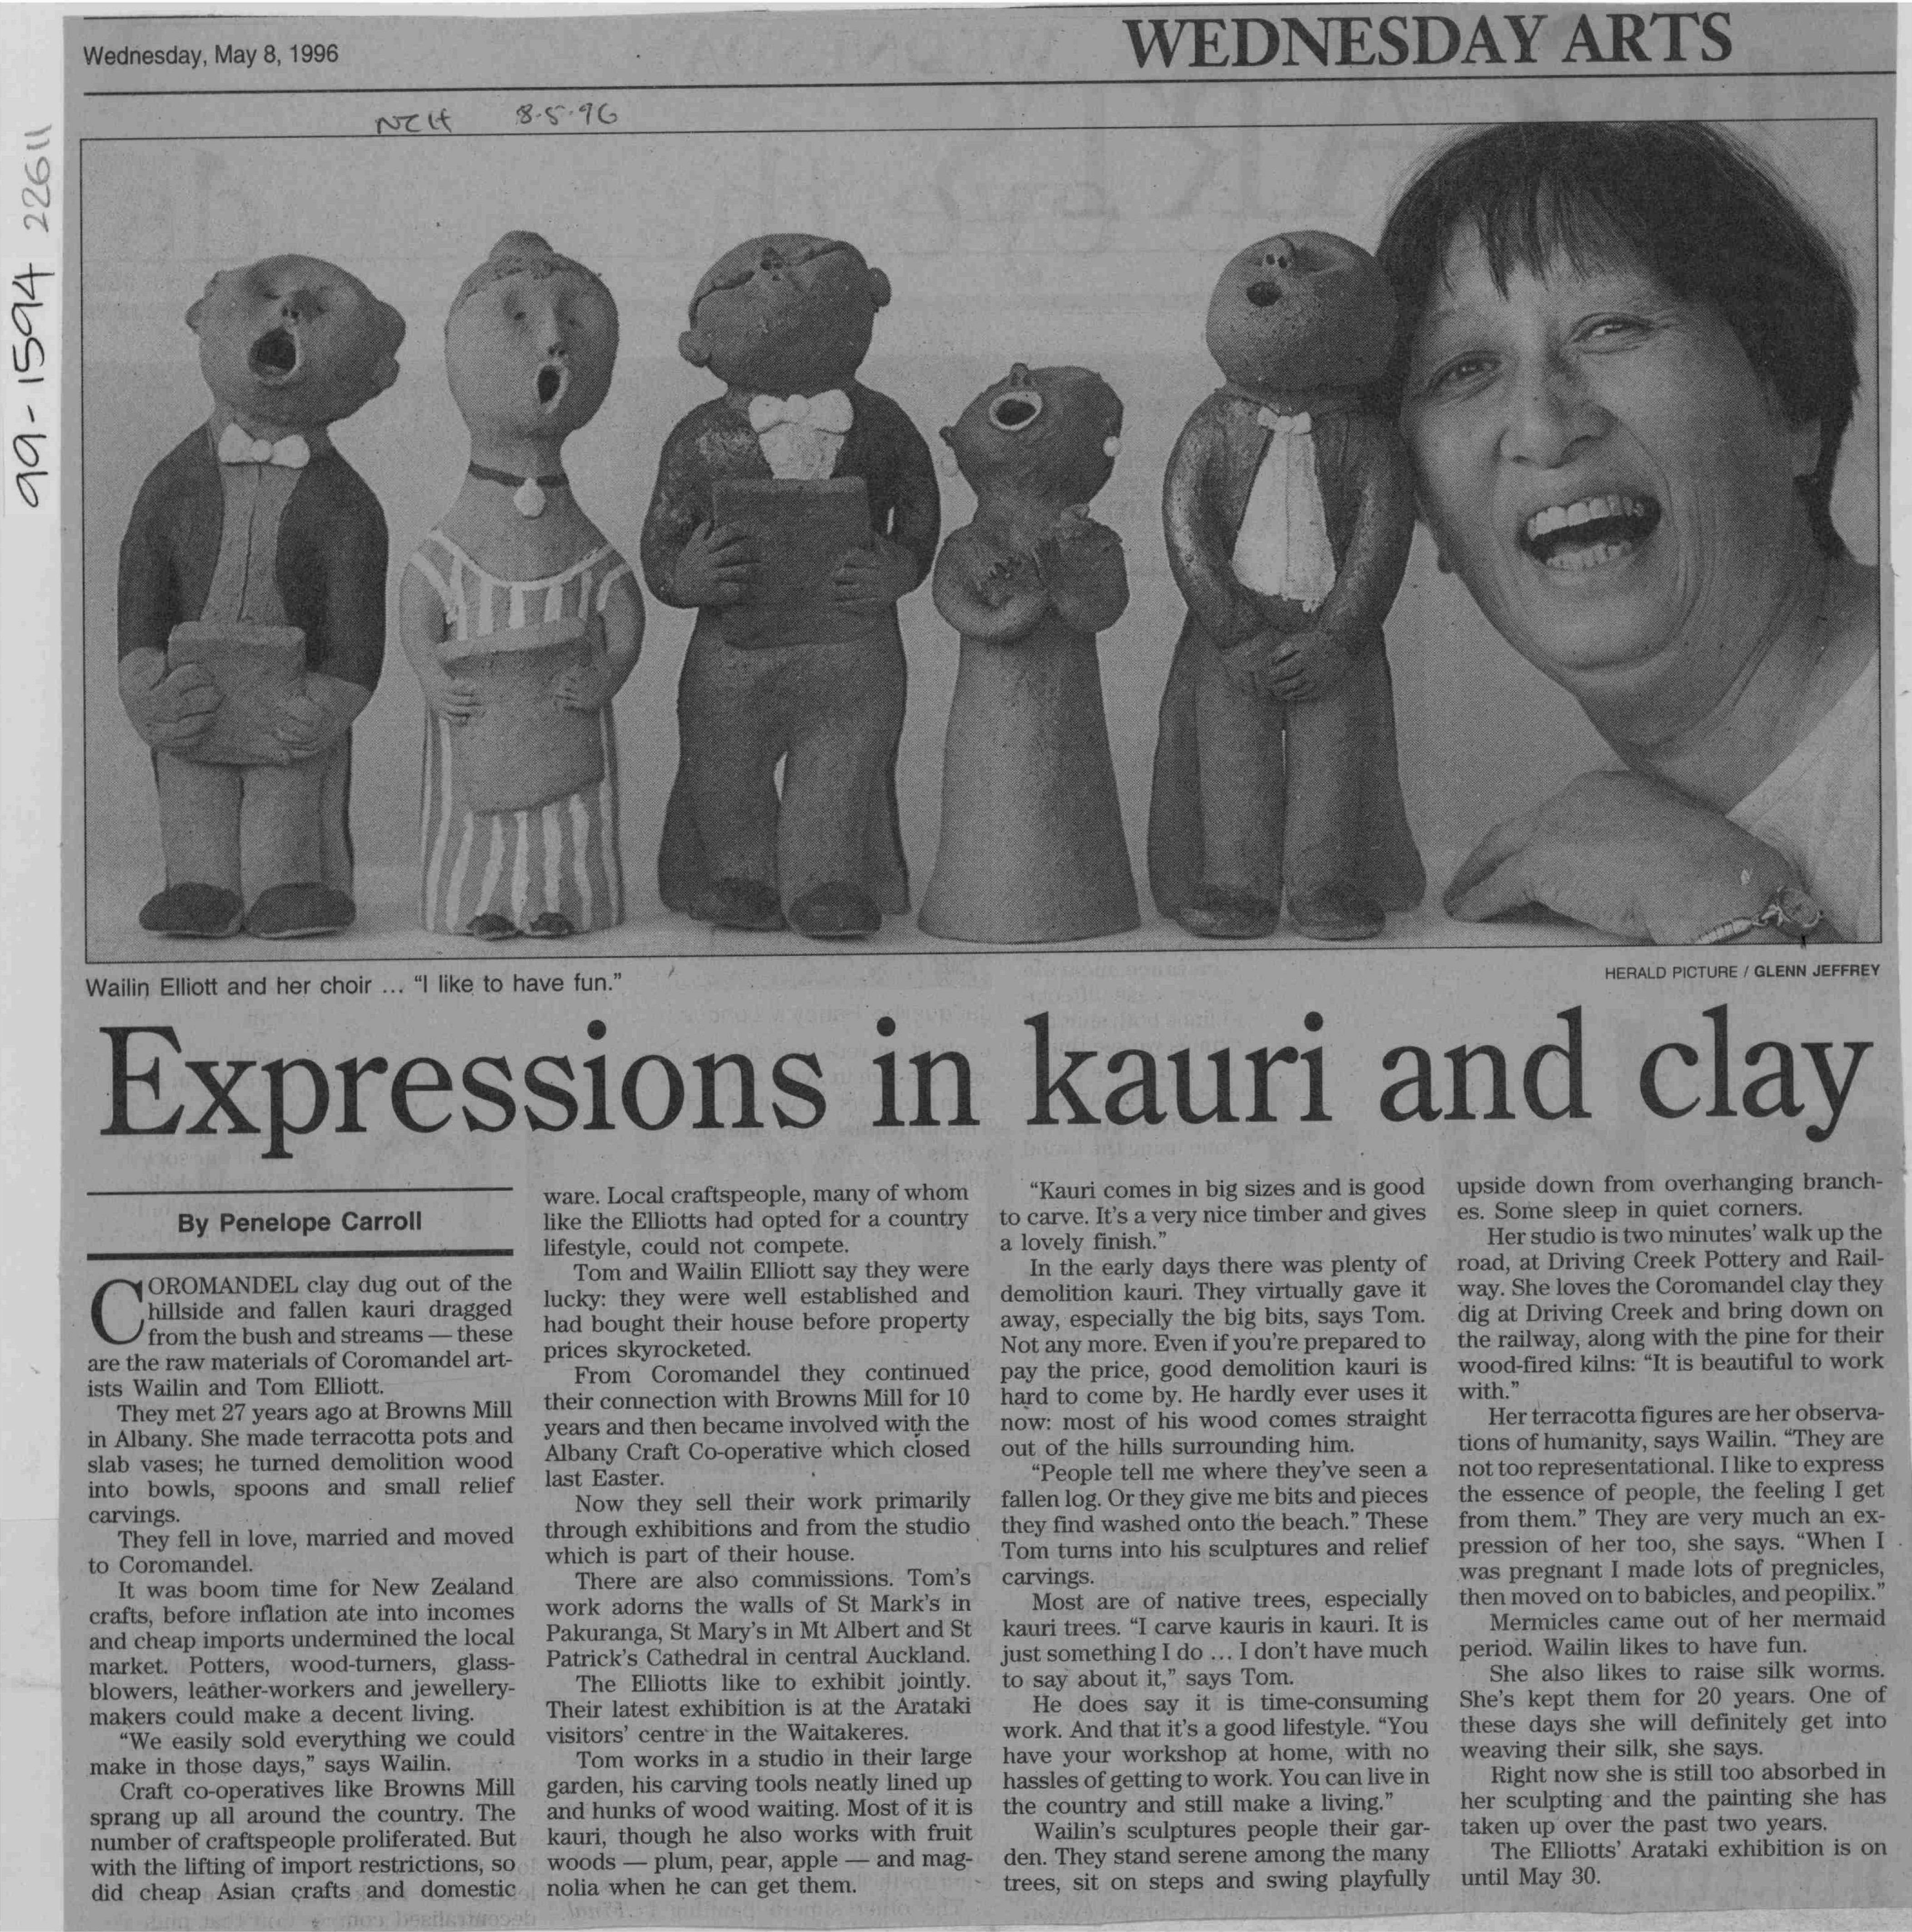 Newspaper clipping with photo of Wailin Elliott with singing clay sculptures.